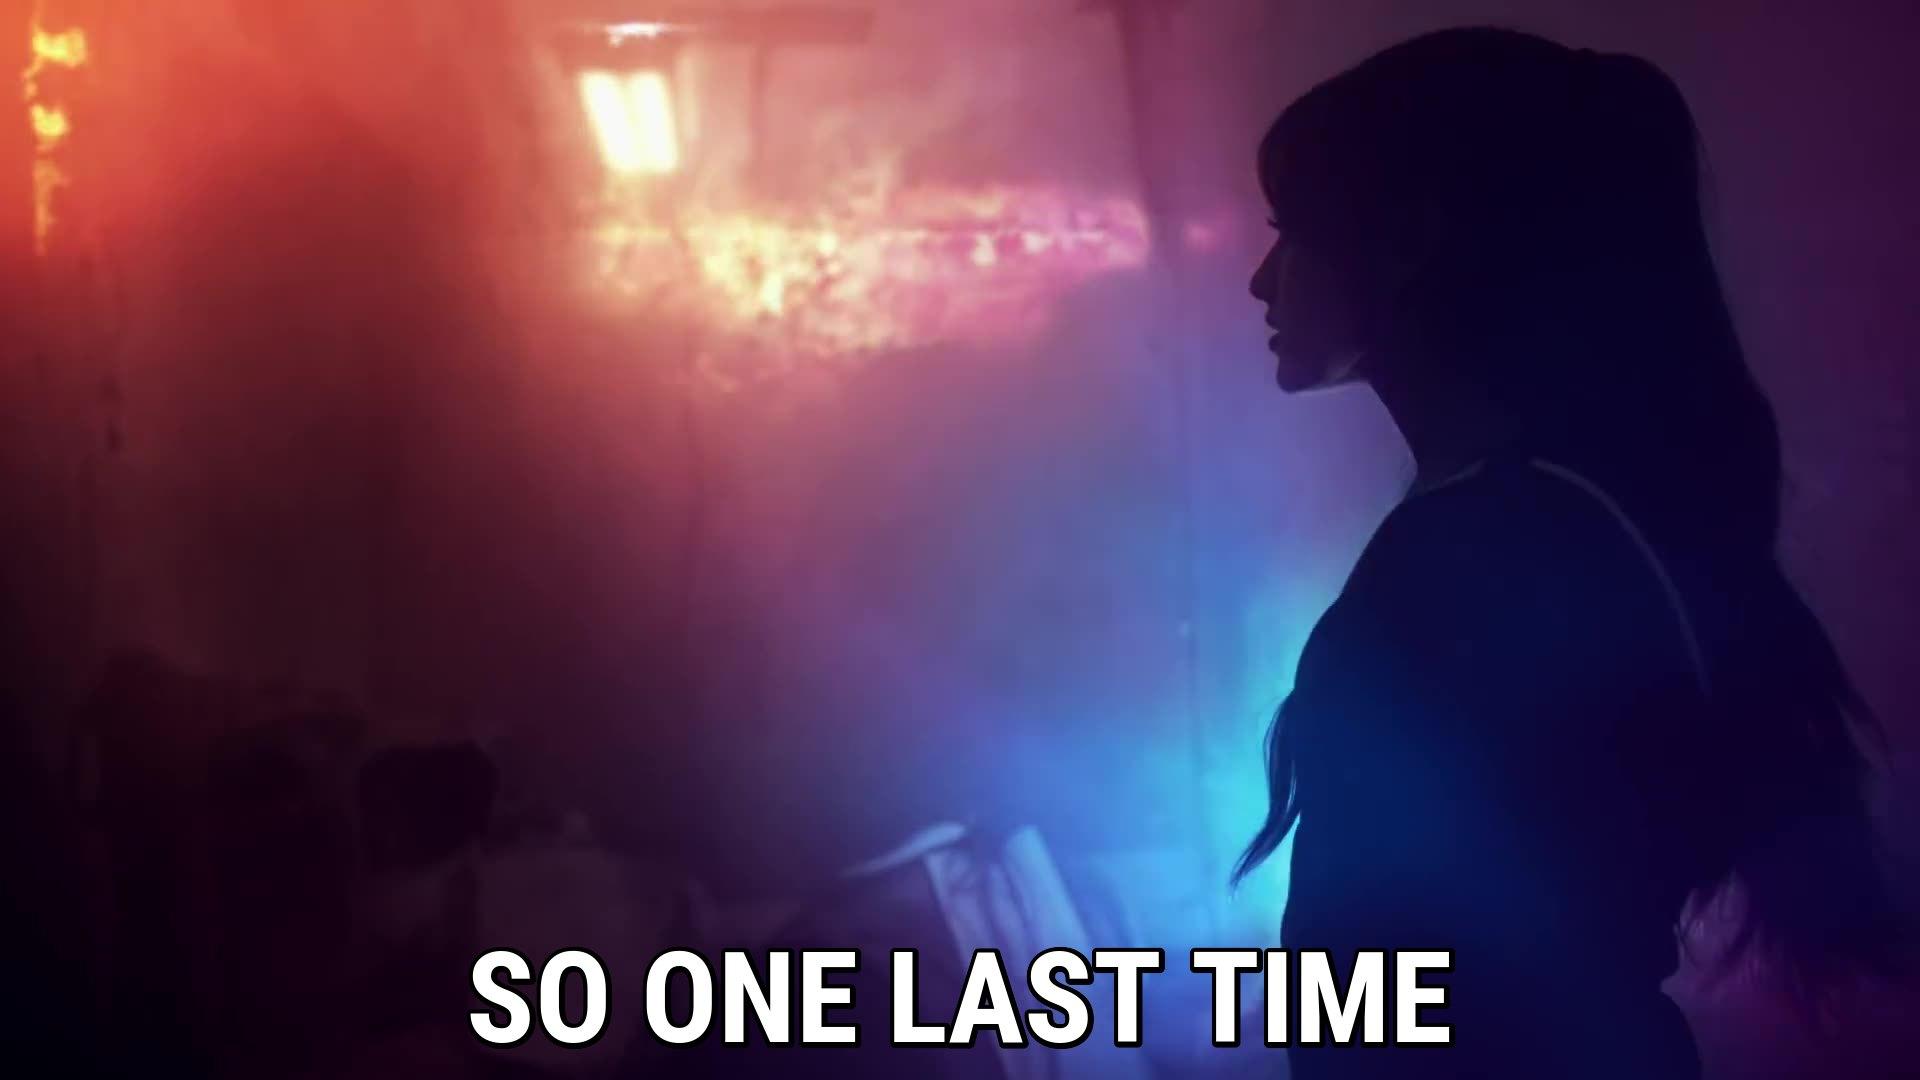 One Last Time lyrics Ariana Grande song in image